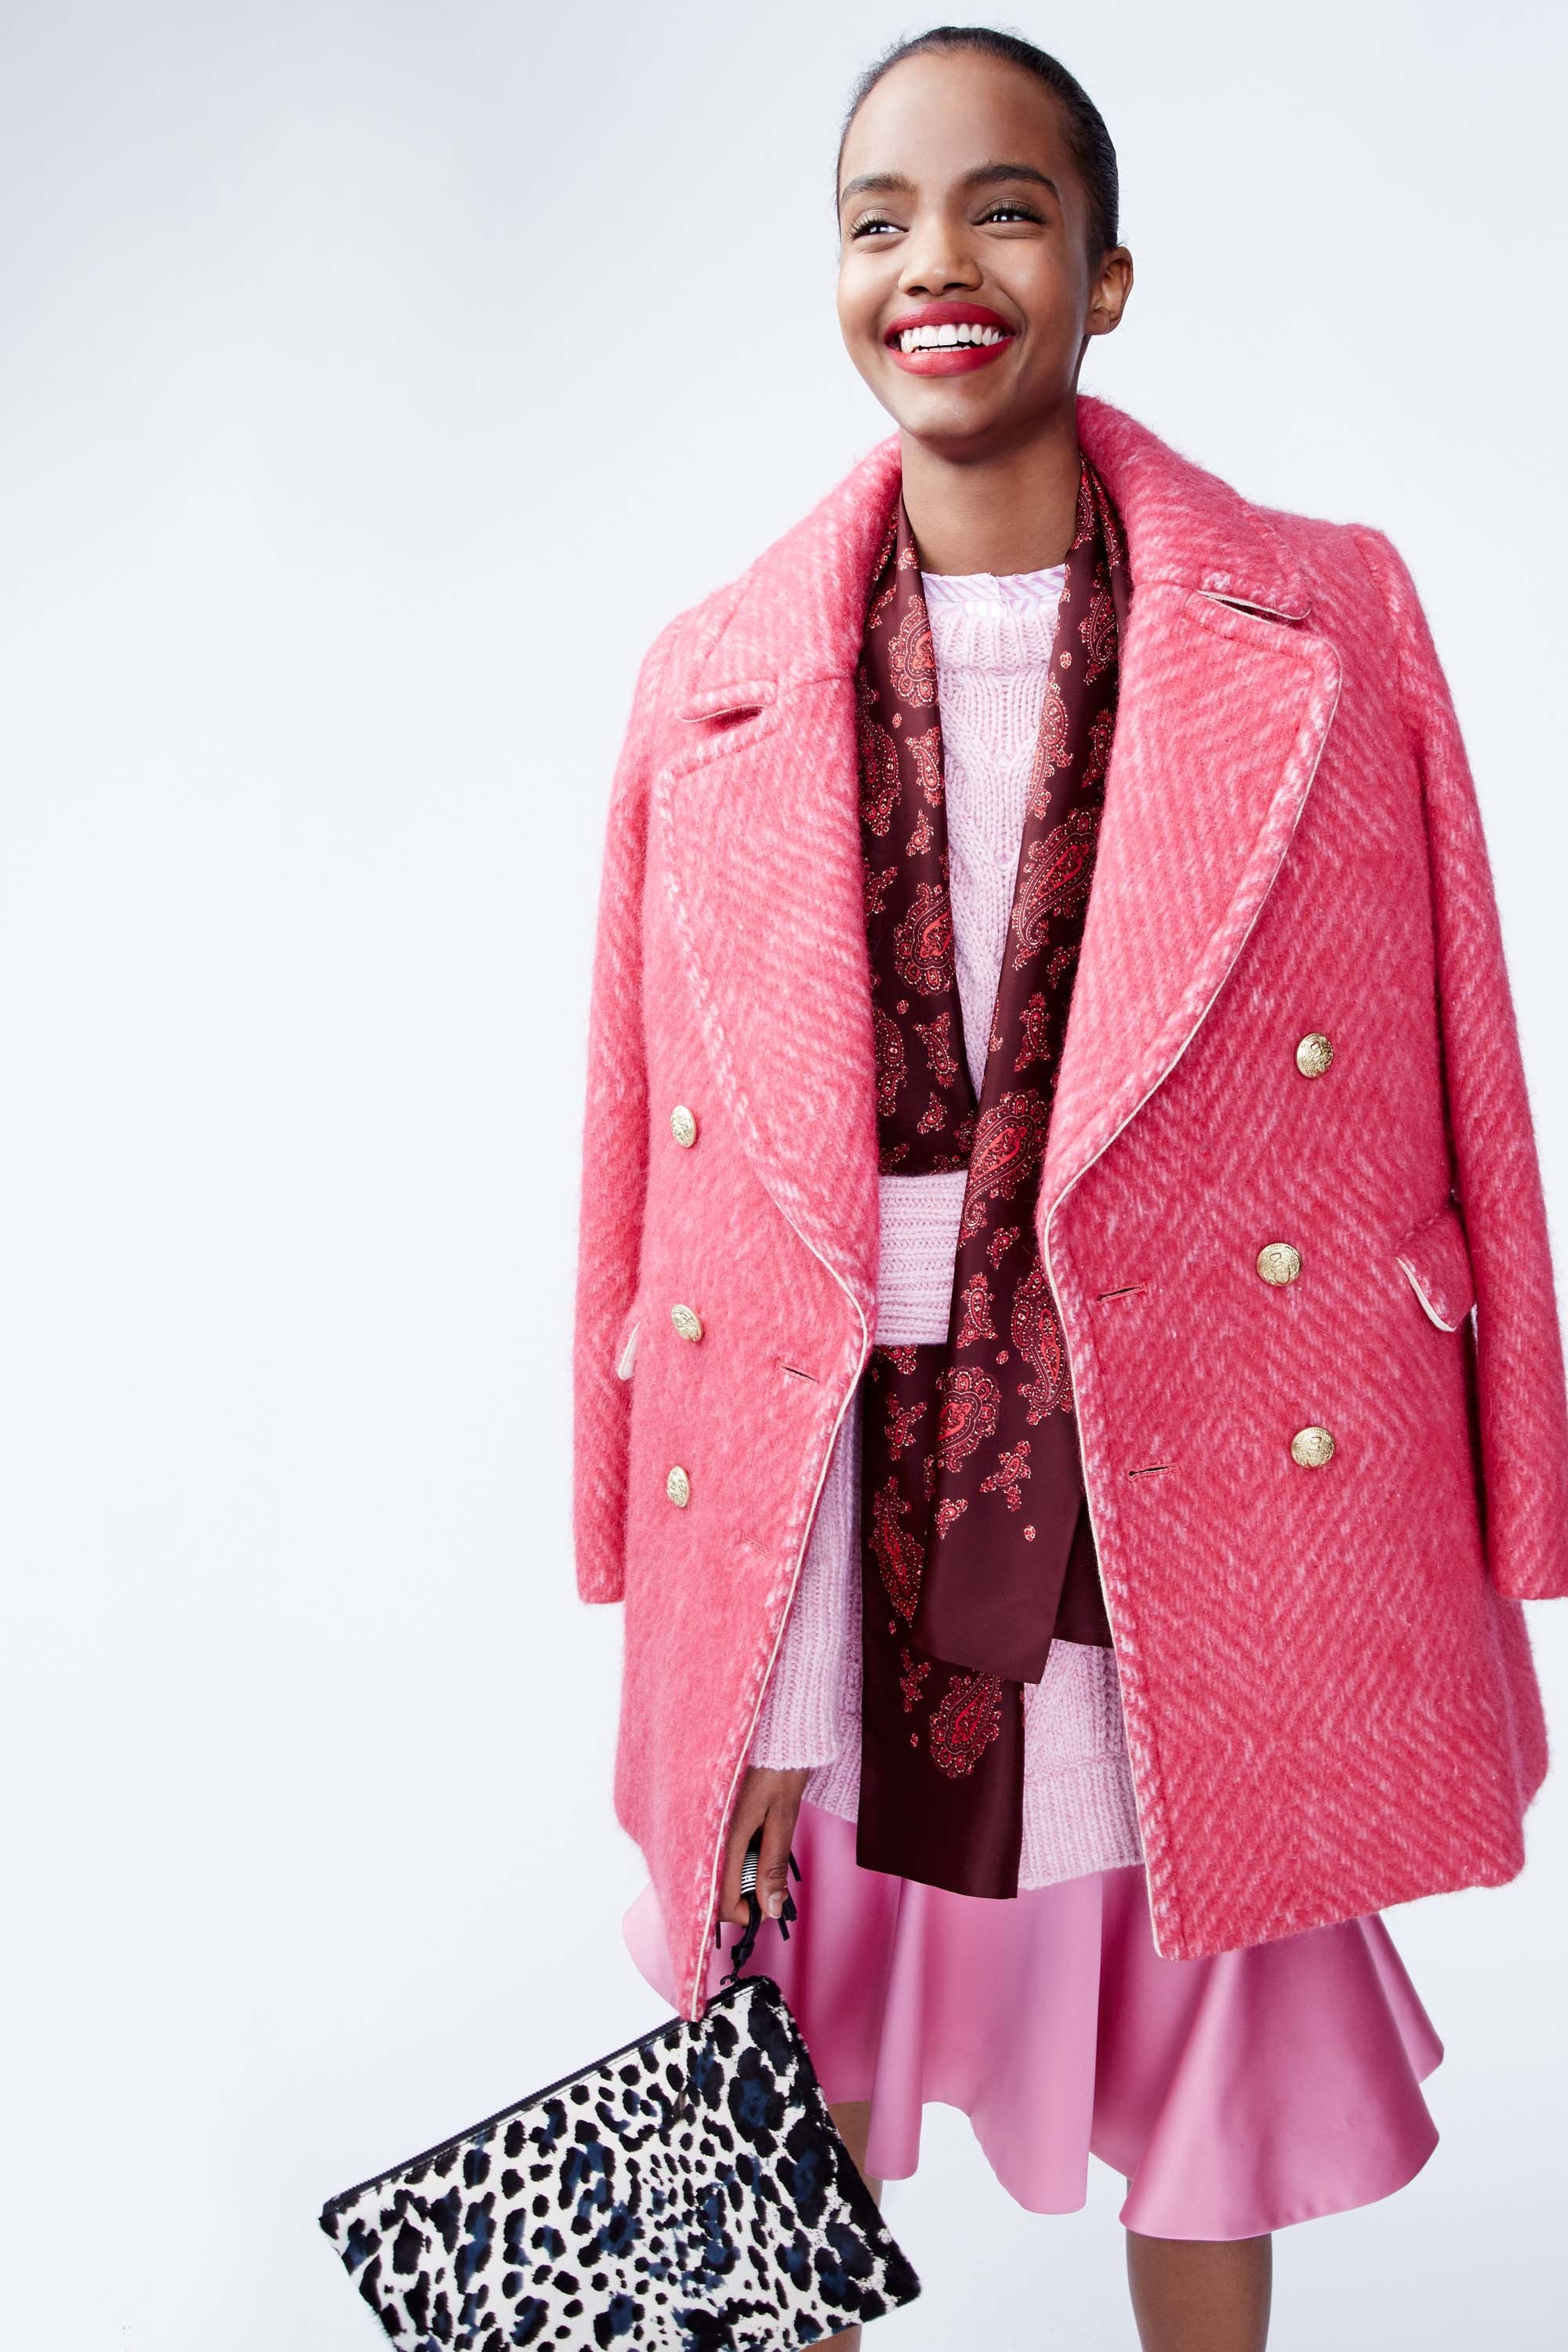 Show Review: J. Crew Fall 2016 Ready to Wear